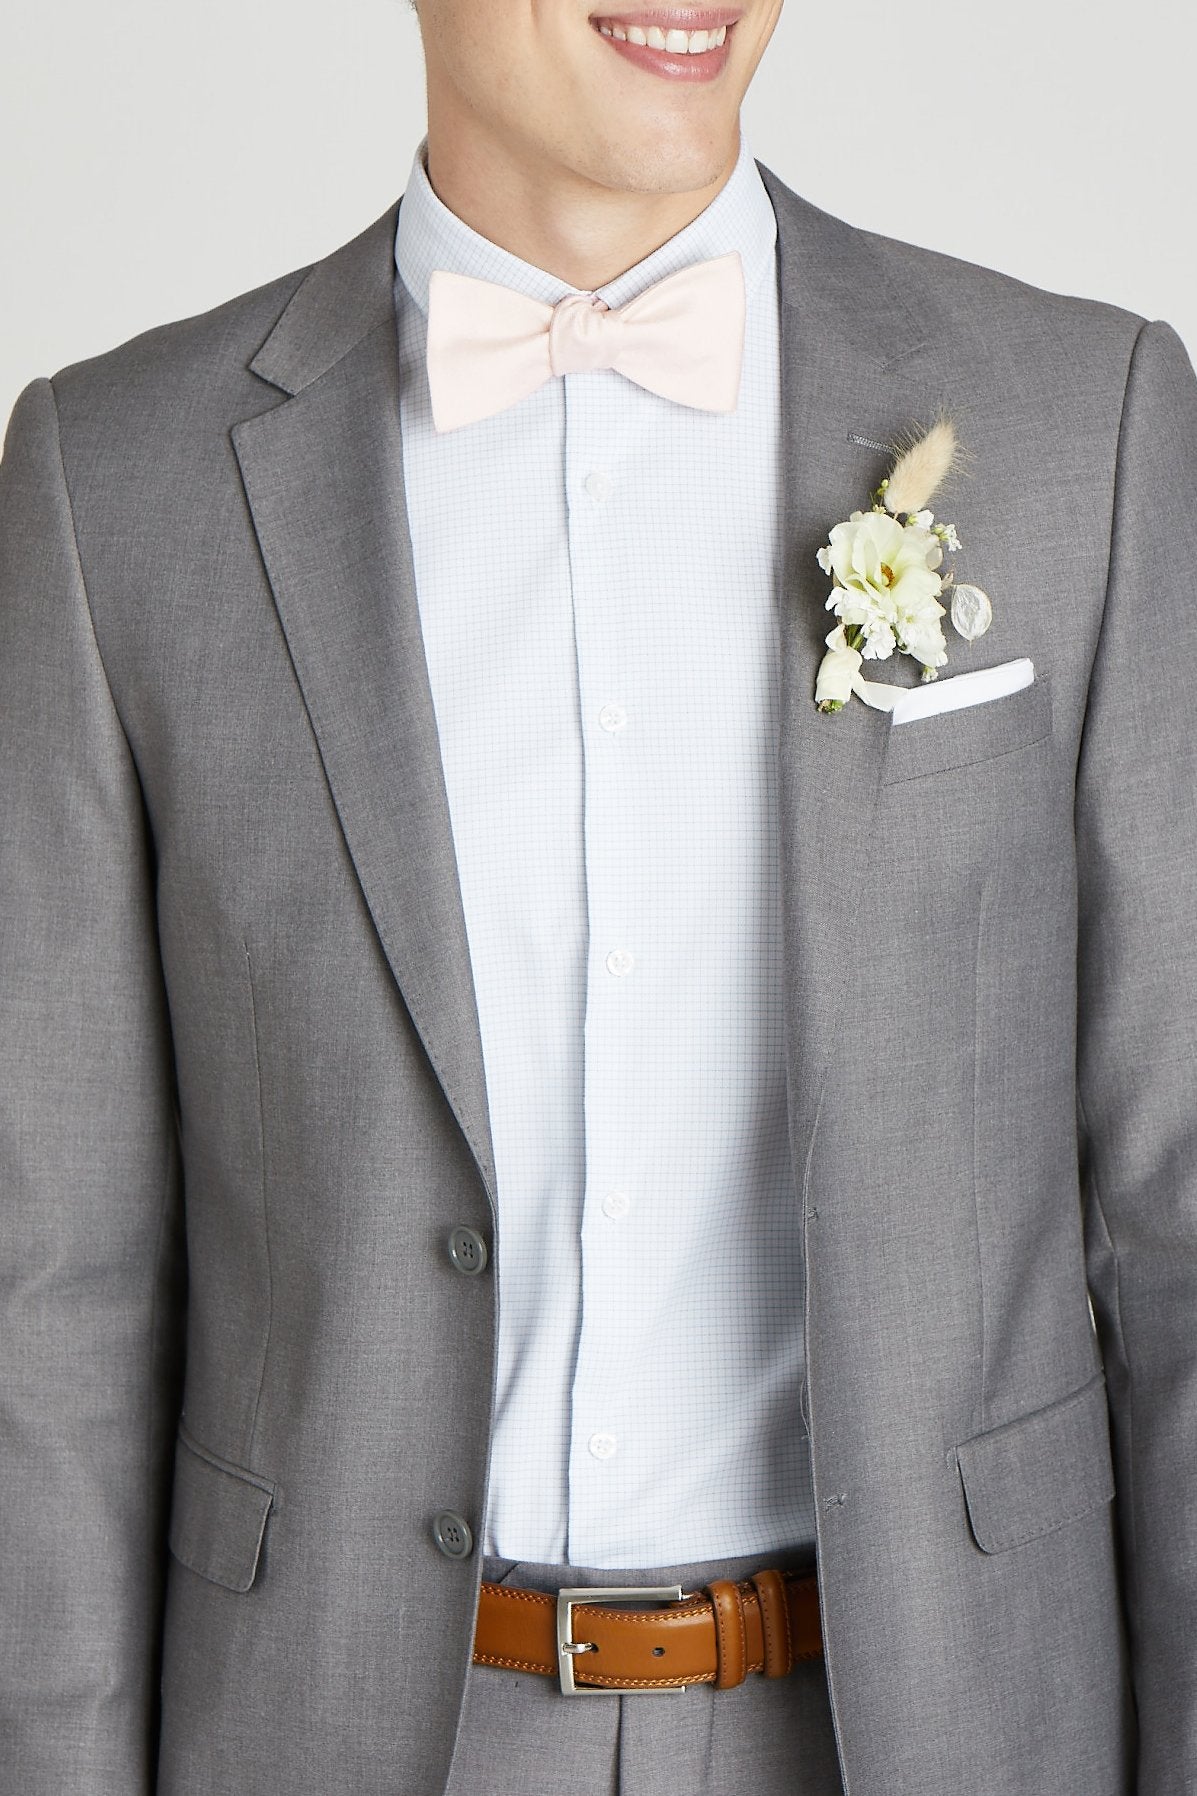 Daniel Bow Tie in pale blush by Birdy Grey, front view